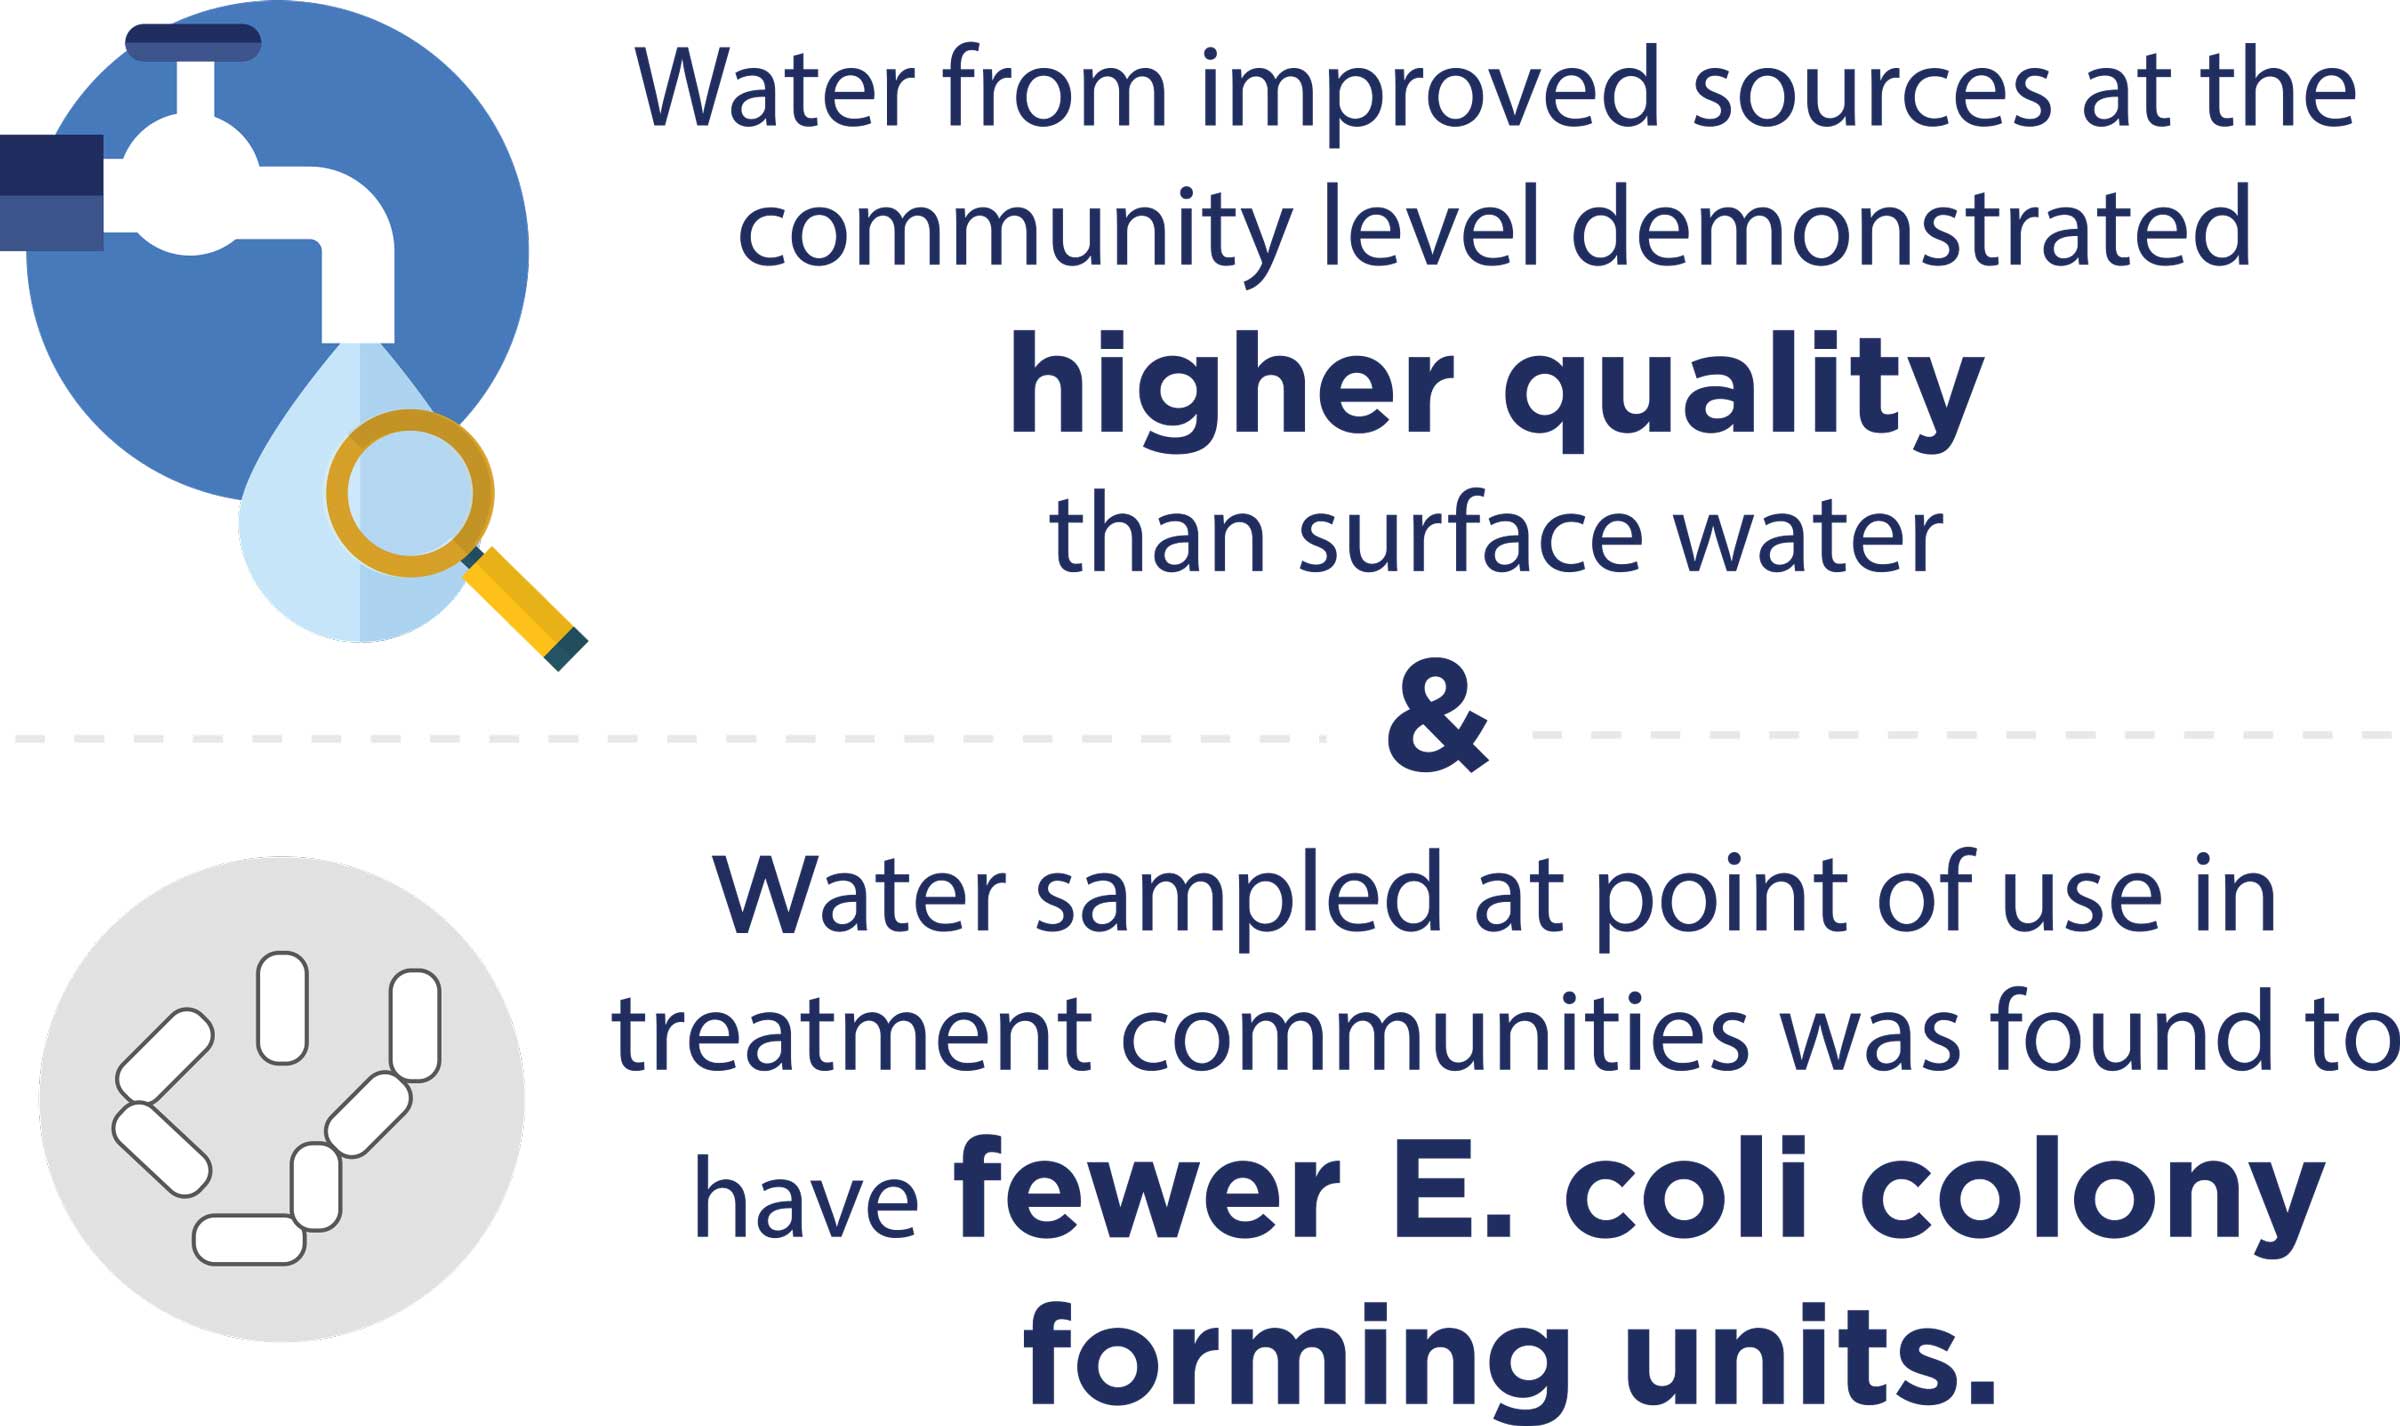 Water from improved sources at the community level demonstrated higher quality than surface water, and water sampled at point of use in treatment communities was found to have fewer E. coli colony forming units.